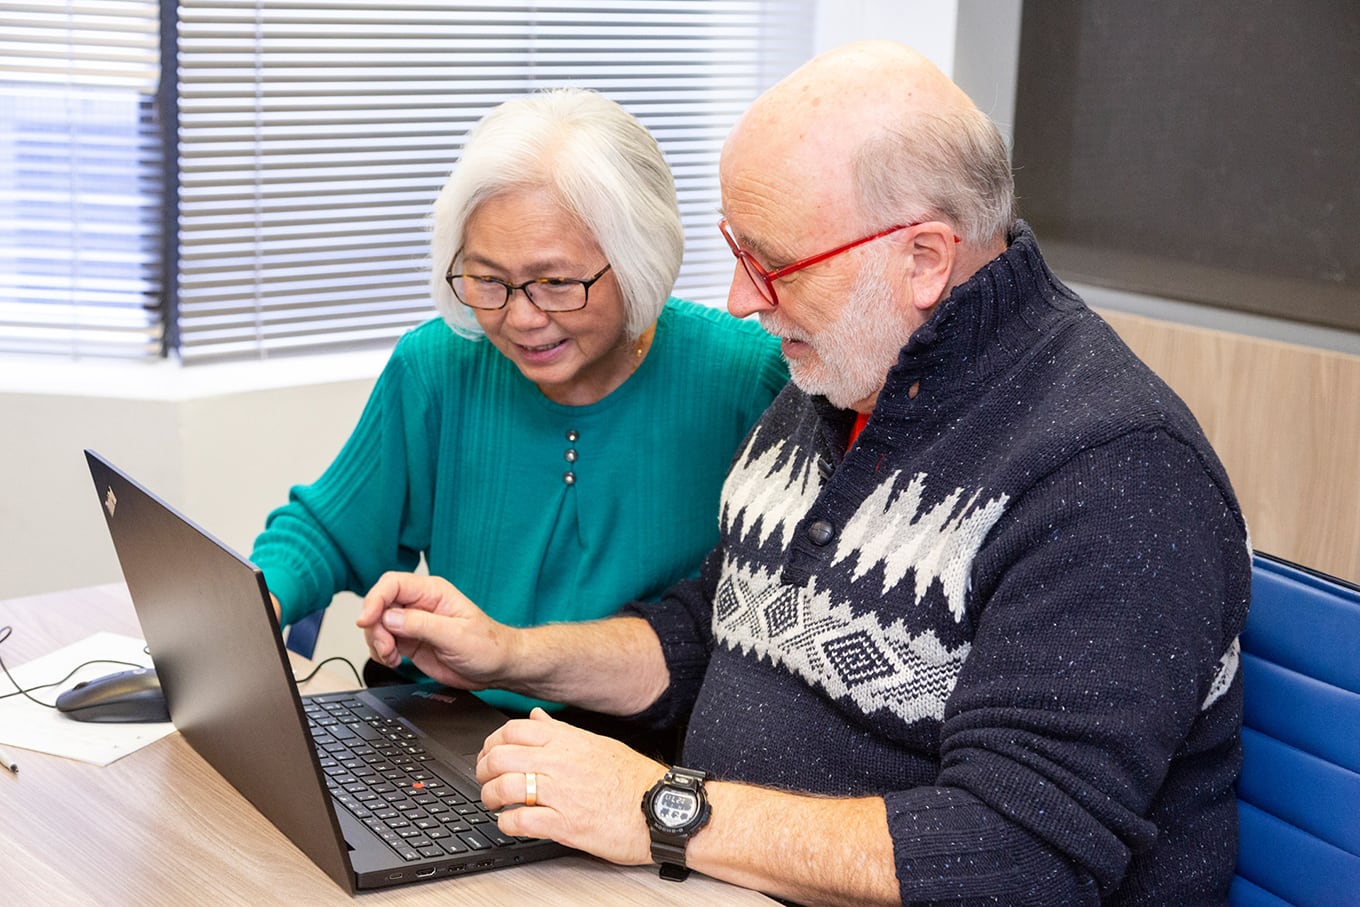 New online dementia education workshops allow more interaction and discussion for Central Kootenay residents